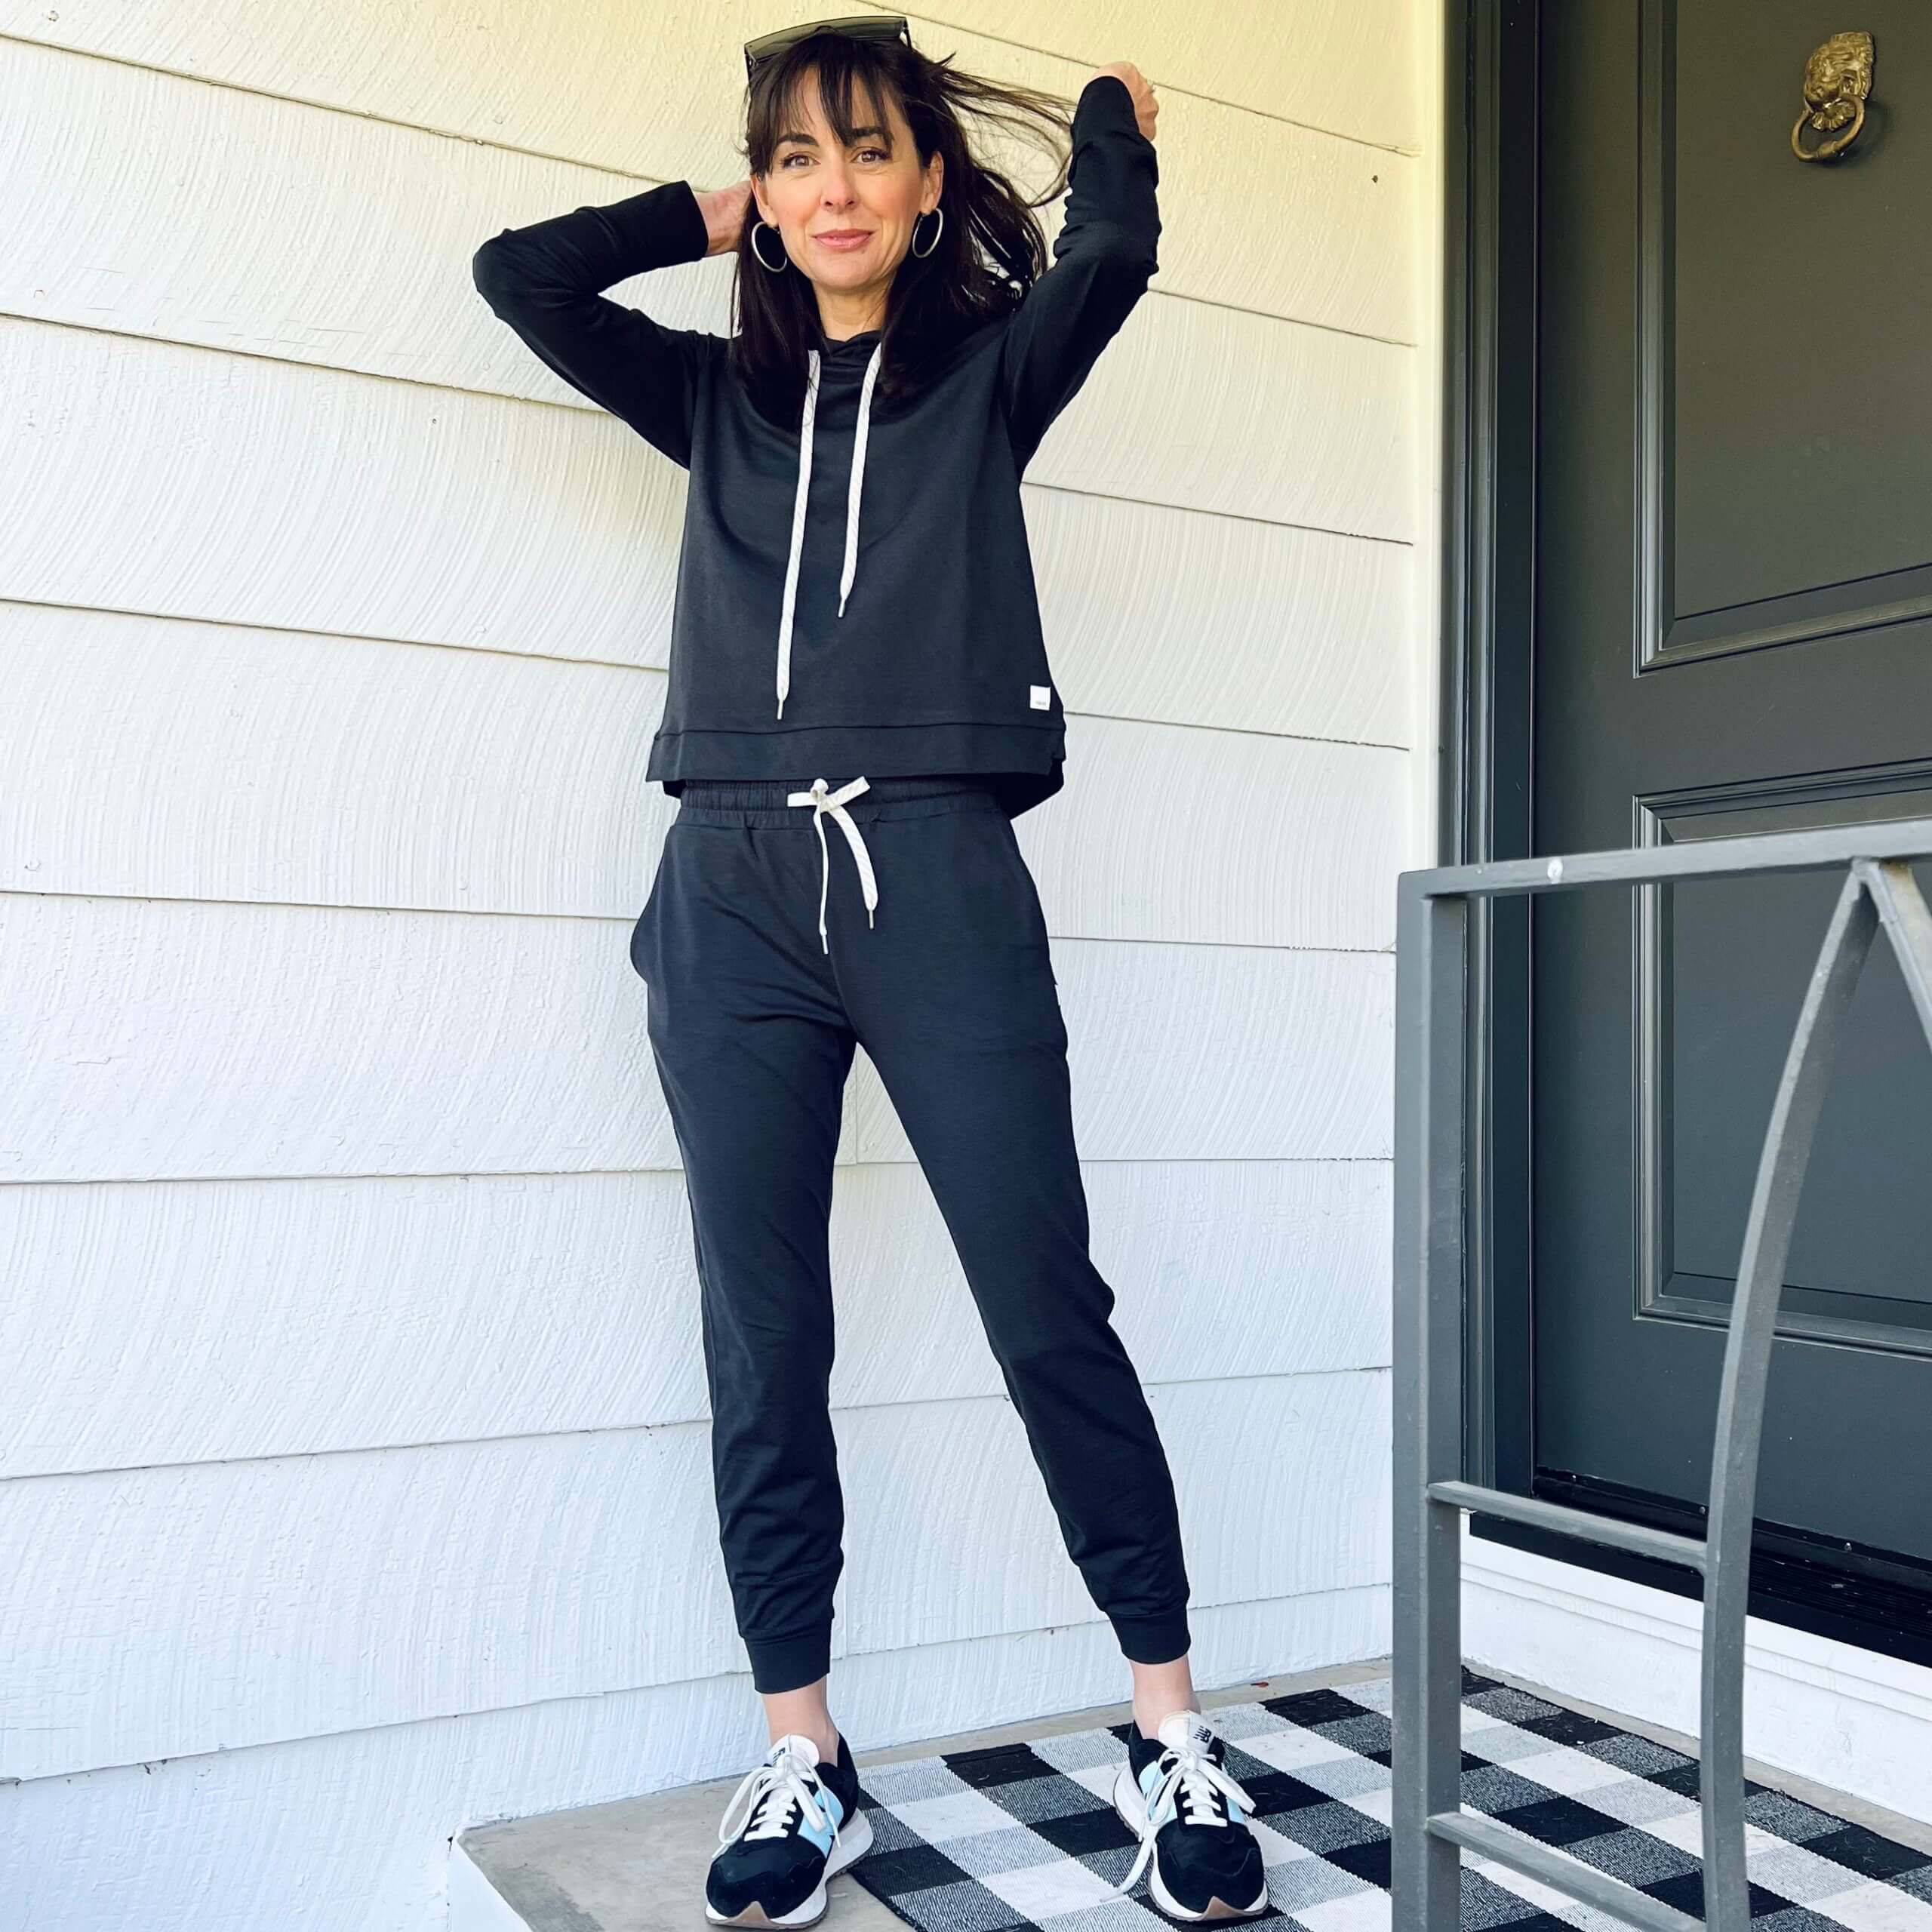 How a Stylist, Mom, and a Businesswoman Style Joggers for Any Occasion